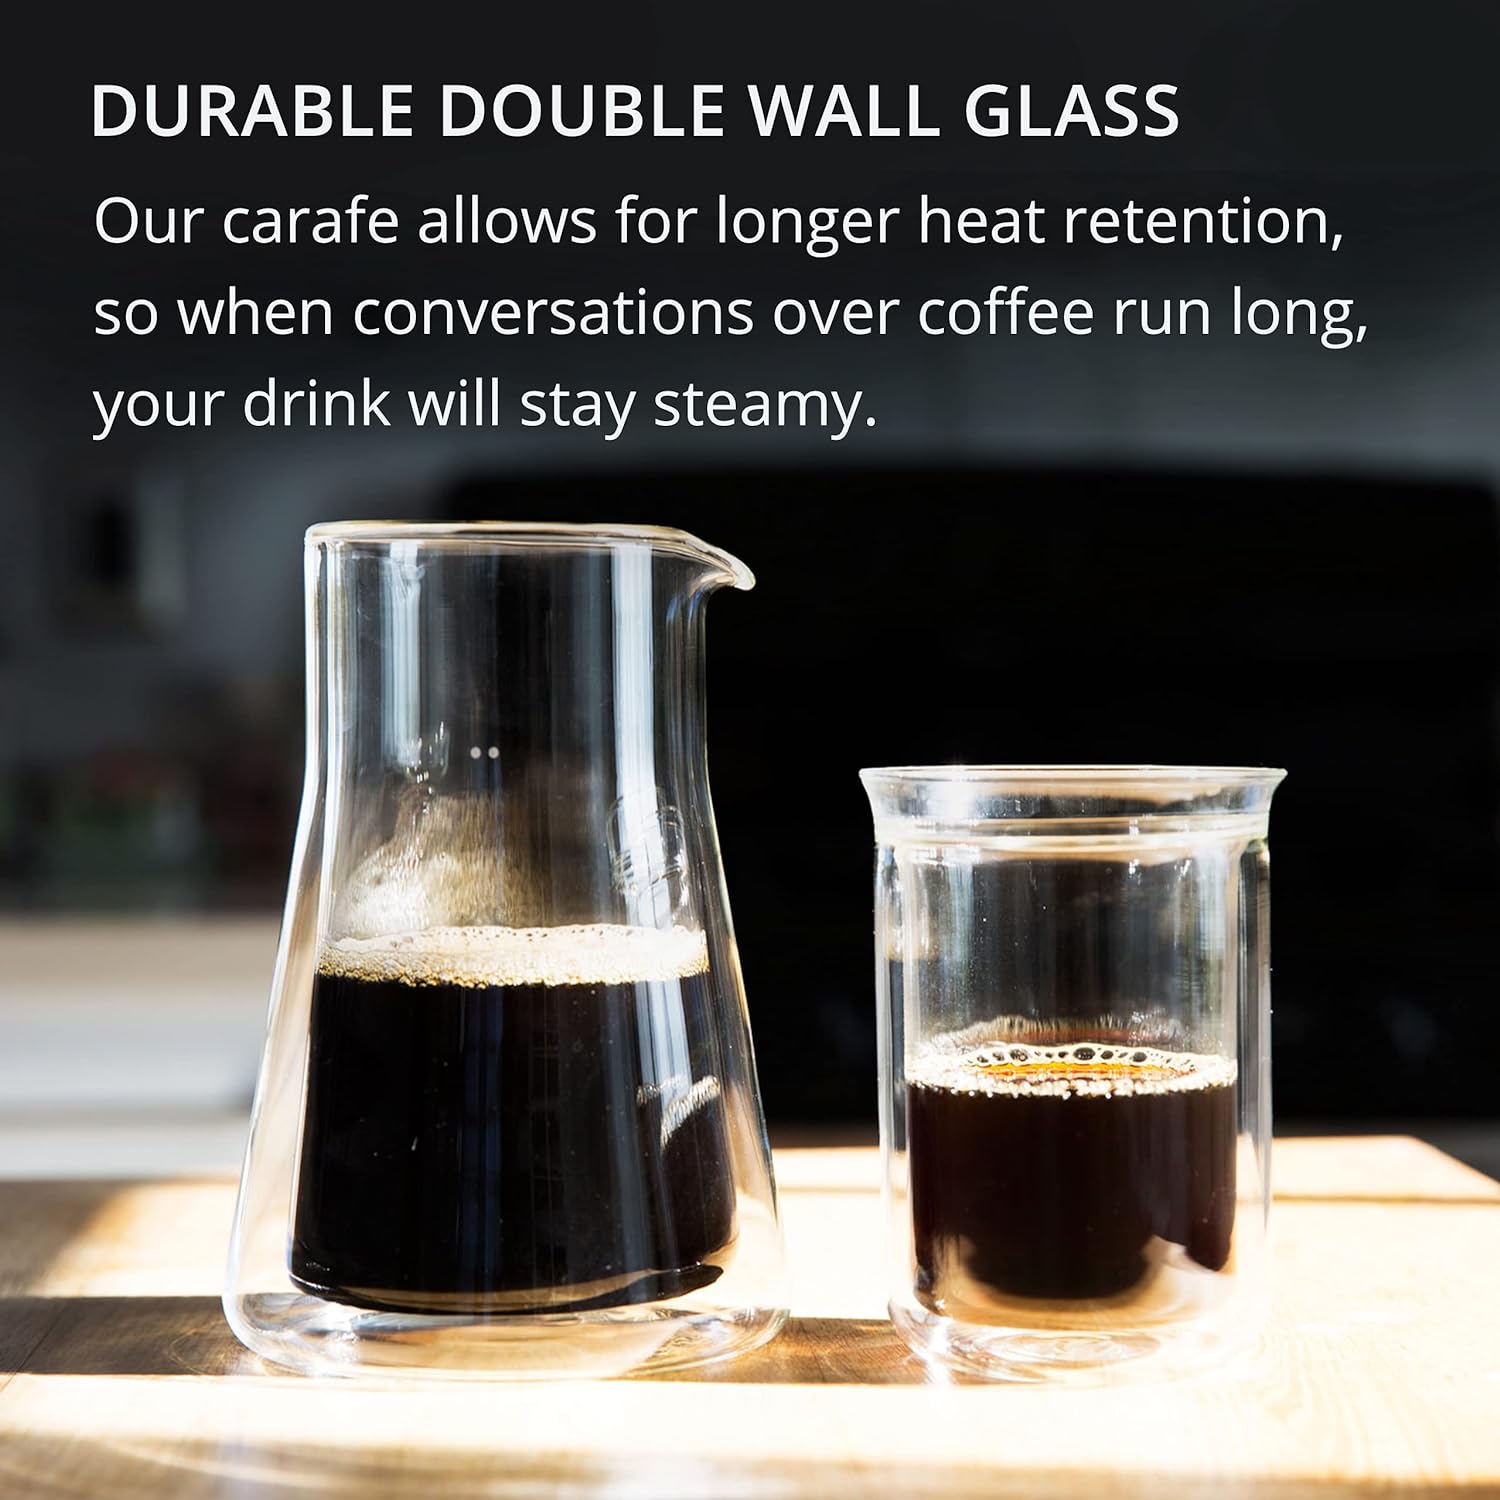 Fellowes Stagg Double Wall Coffee Carafe - Vessel for Pour Over Manual Coffee Maker, Handblown Borosilicate Glass Decanter, 20 oz Clear